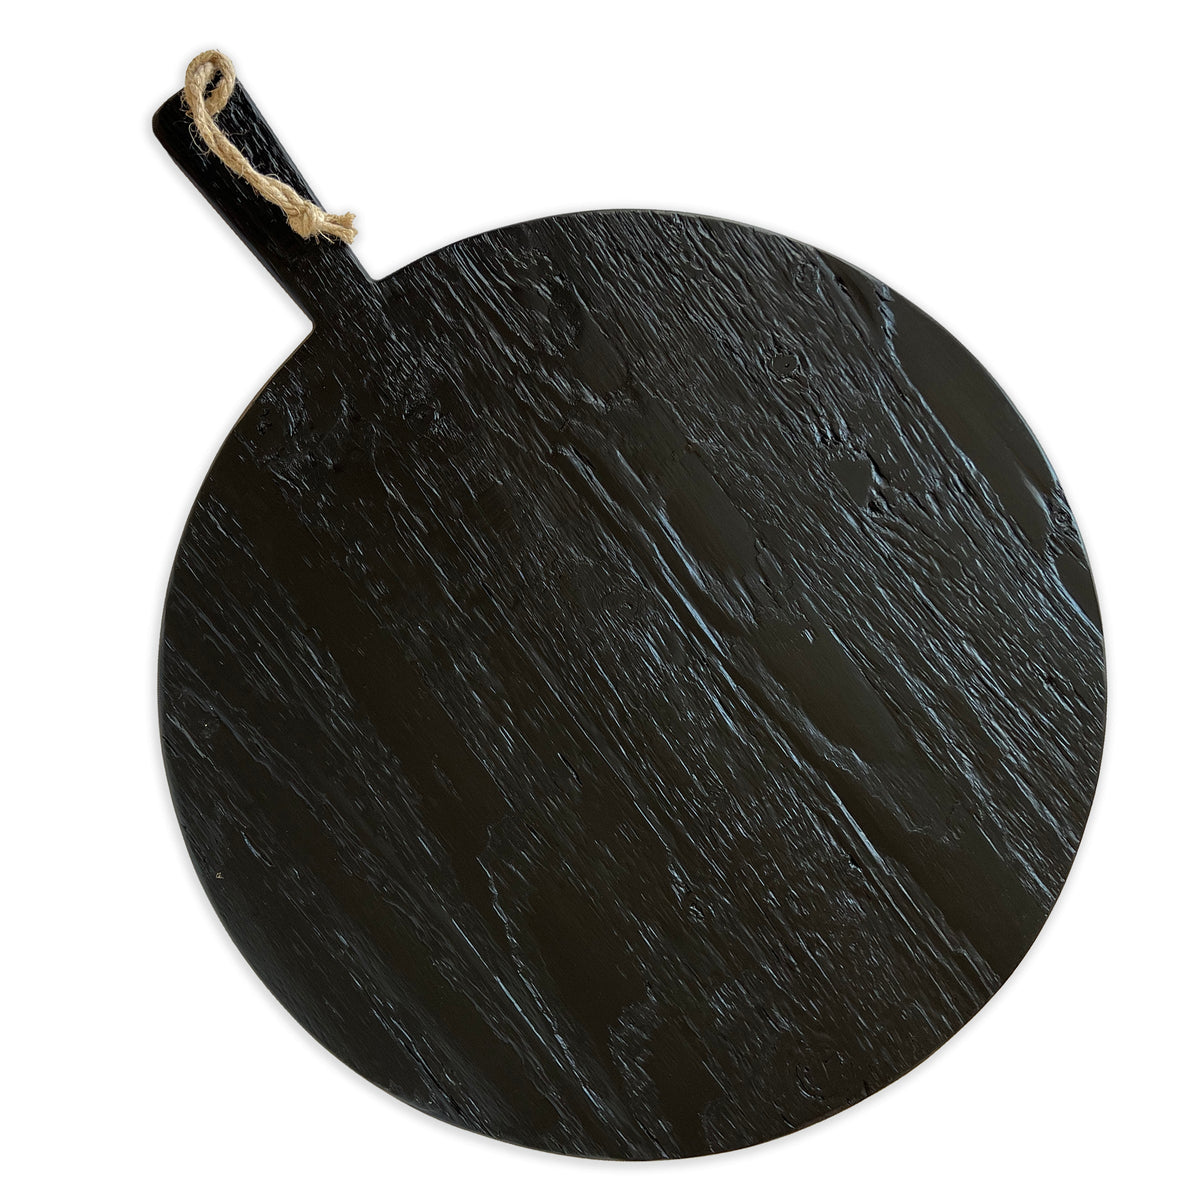 Oversized Round Charcuterie Serving Board in Black with Contrasting Natural Stripes is made from reclaimed European Timbers, featuring one side with a textured finish and one side with a smooth finish, exclusively from Caskata. This image shows the textured, reclaimed side.